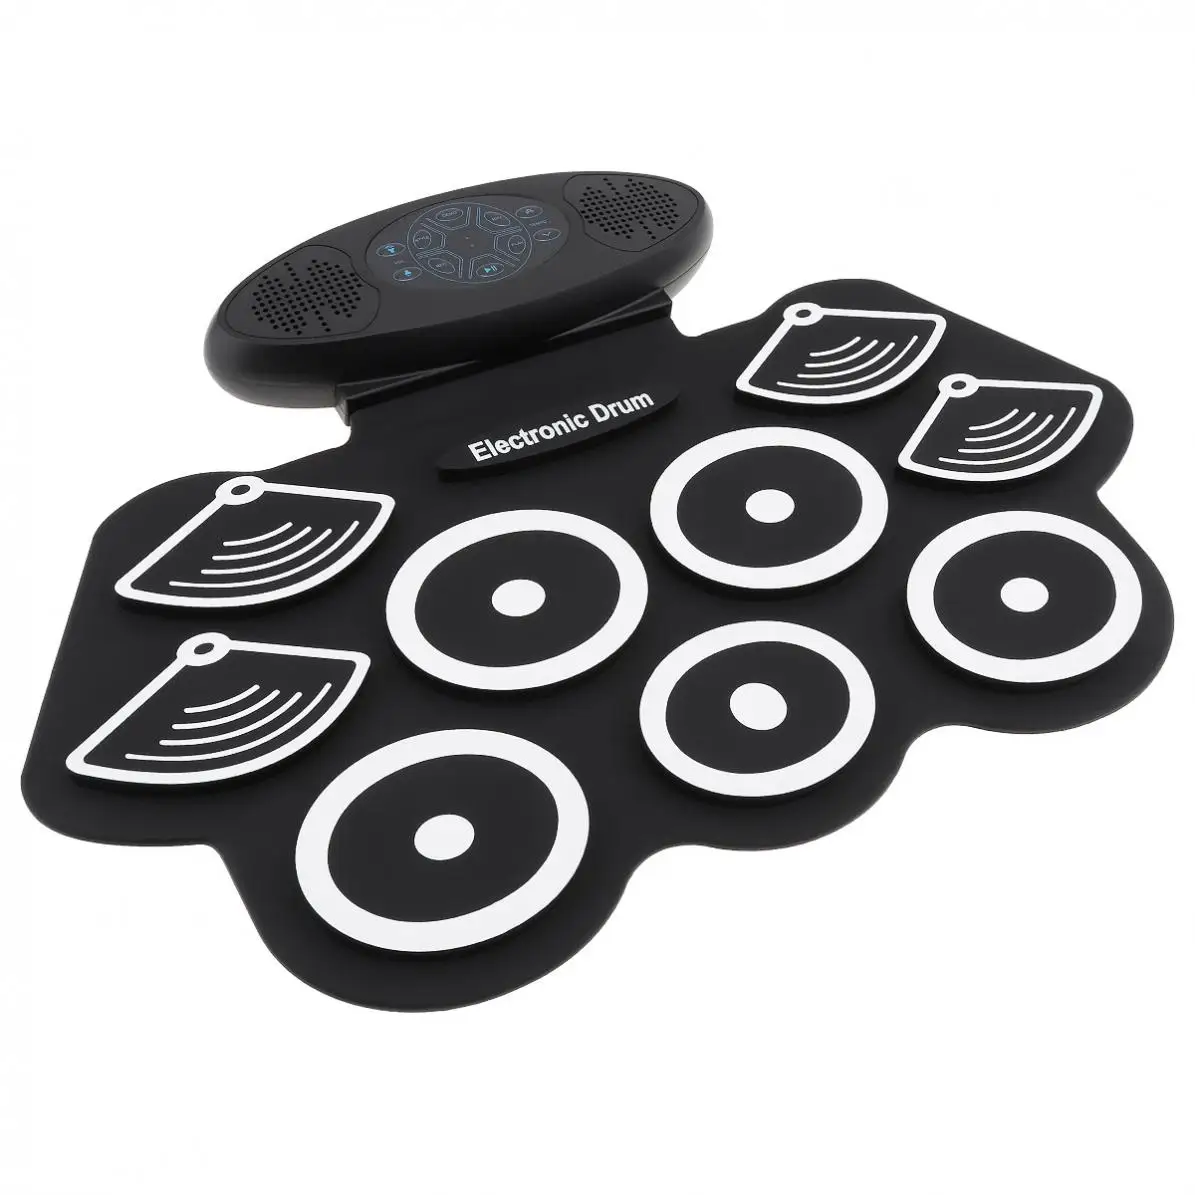 9 Pads Electronic Drum Roll up Thicken Silicone Drum Double Speakers Stereo Electric Drum Kit with Drumsticks and Sustain Pedal enlarge